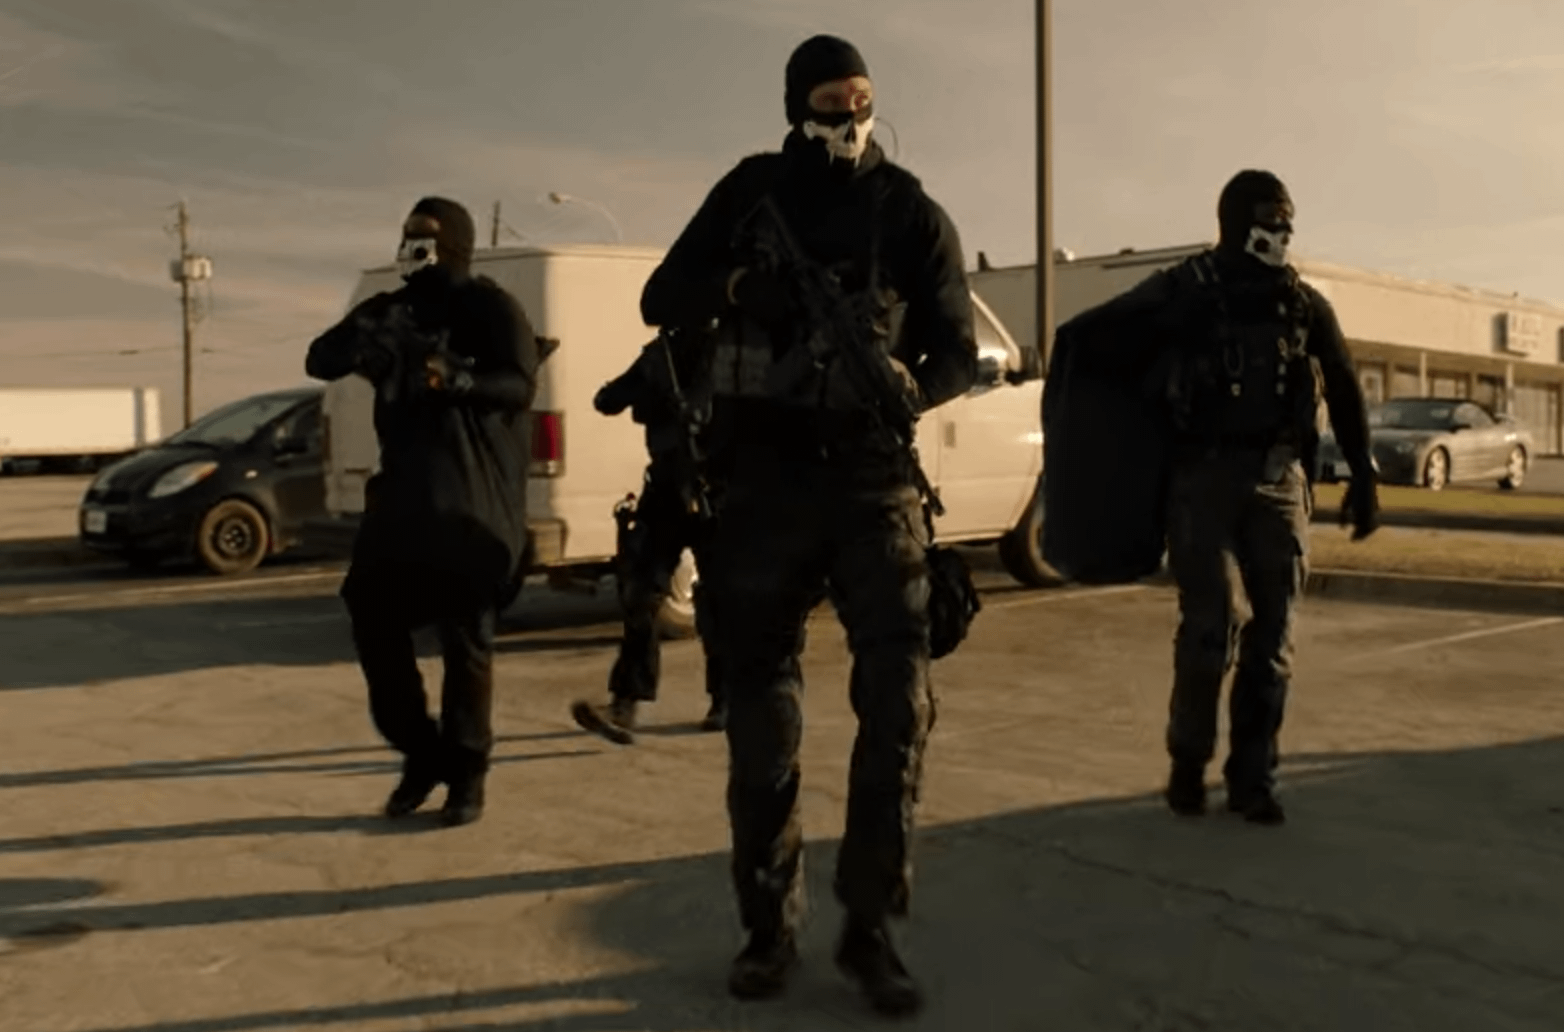 watch den of thieves free online full movie no download or sign up